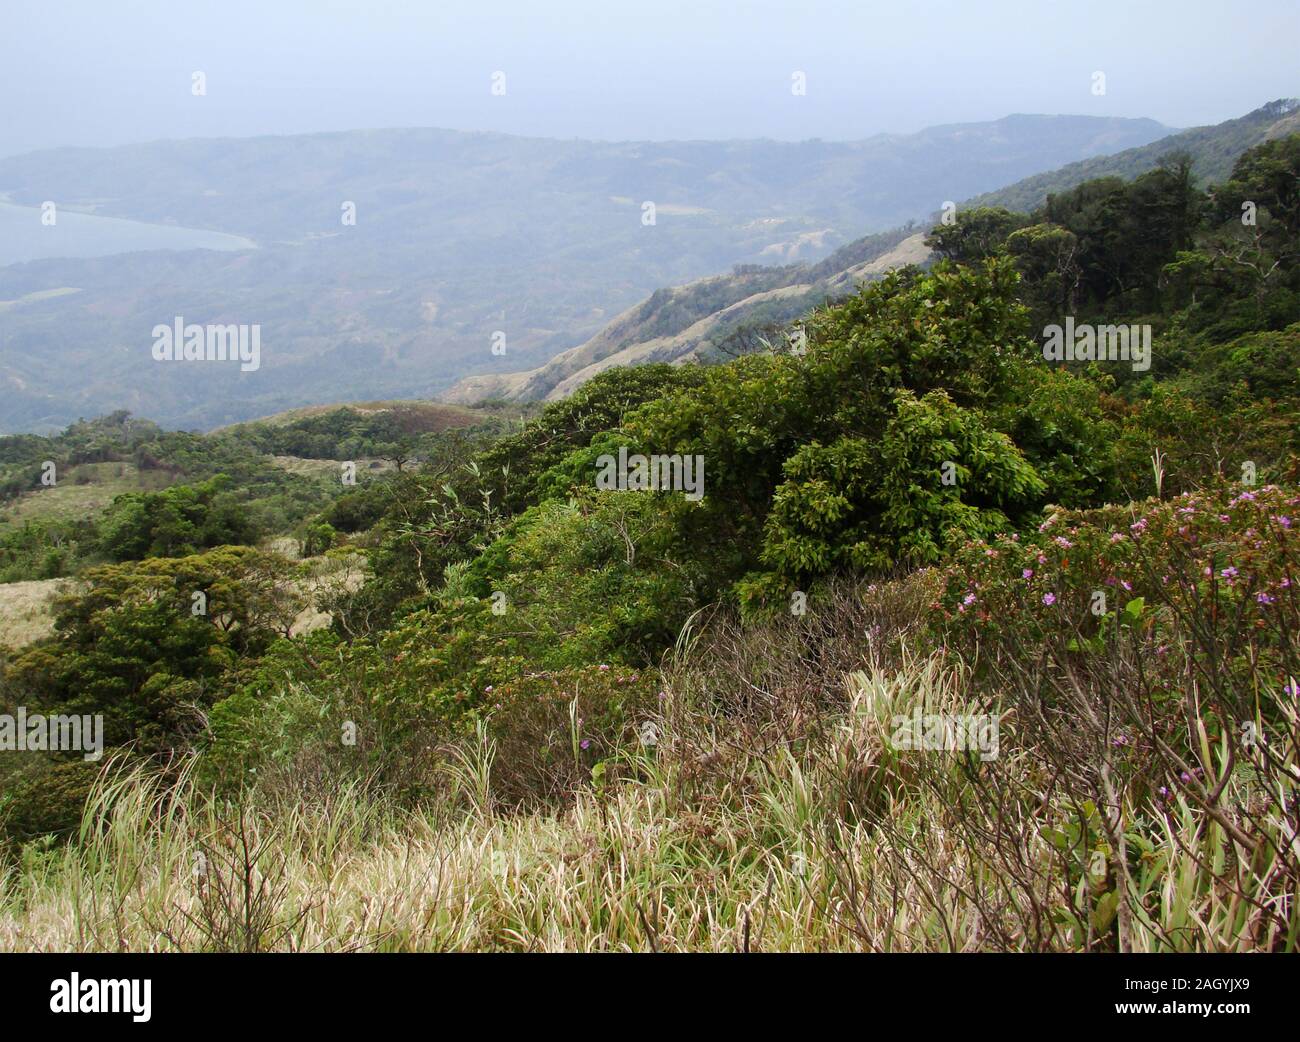 Hills in Mindoro island (The Philippines), showing signs of excessive logging, which increases erosion risk and loss of fertile soil Stock Photo